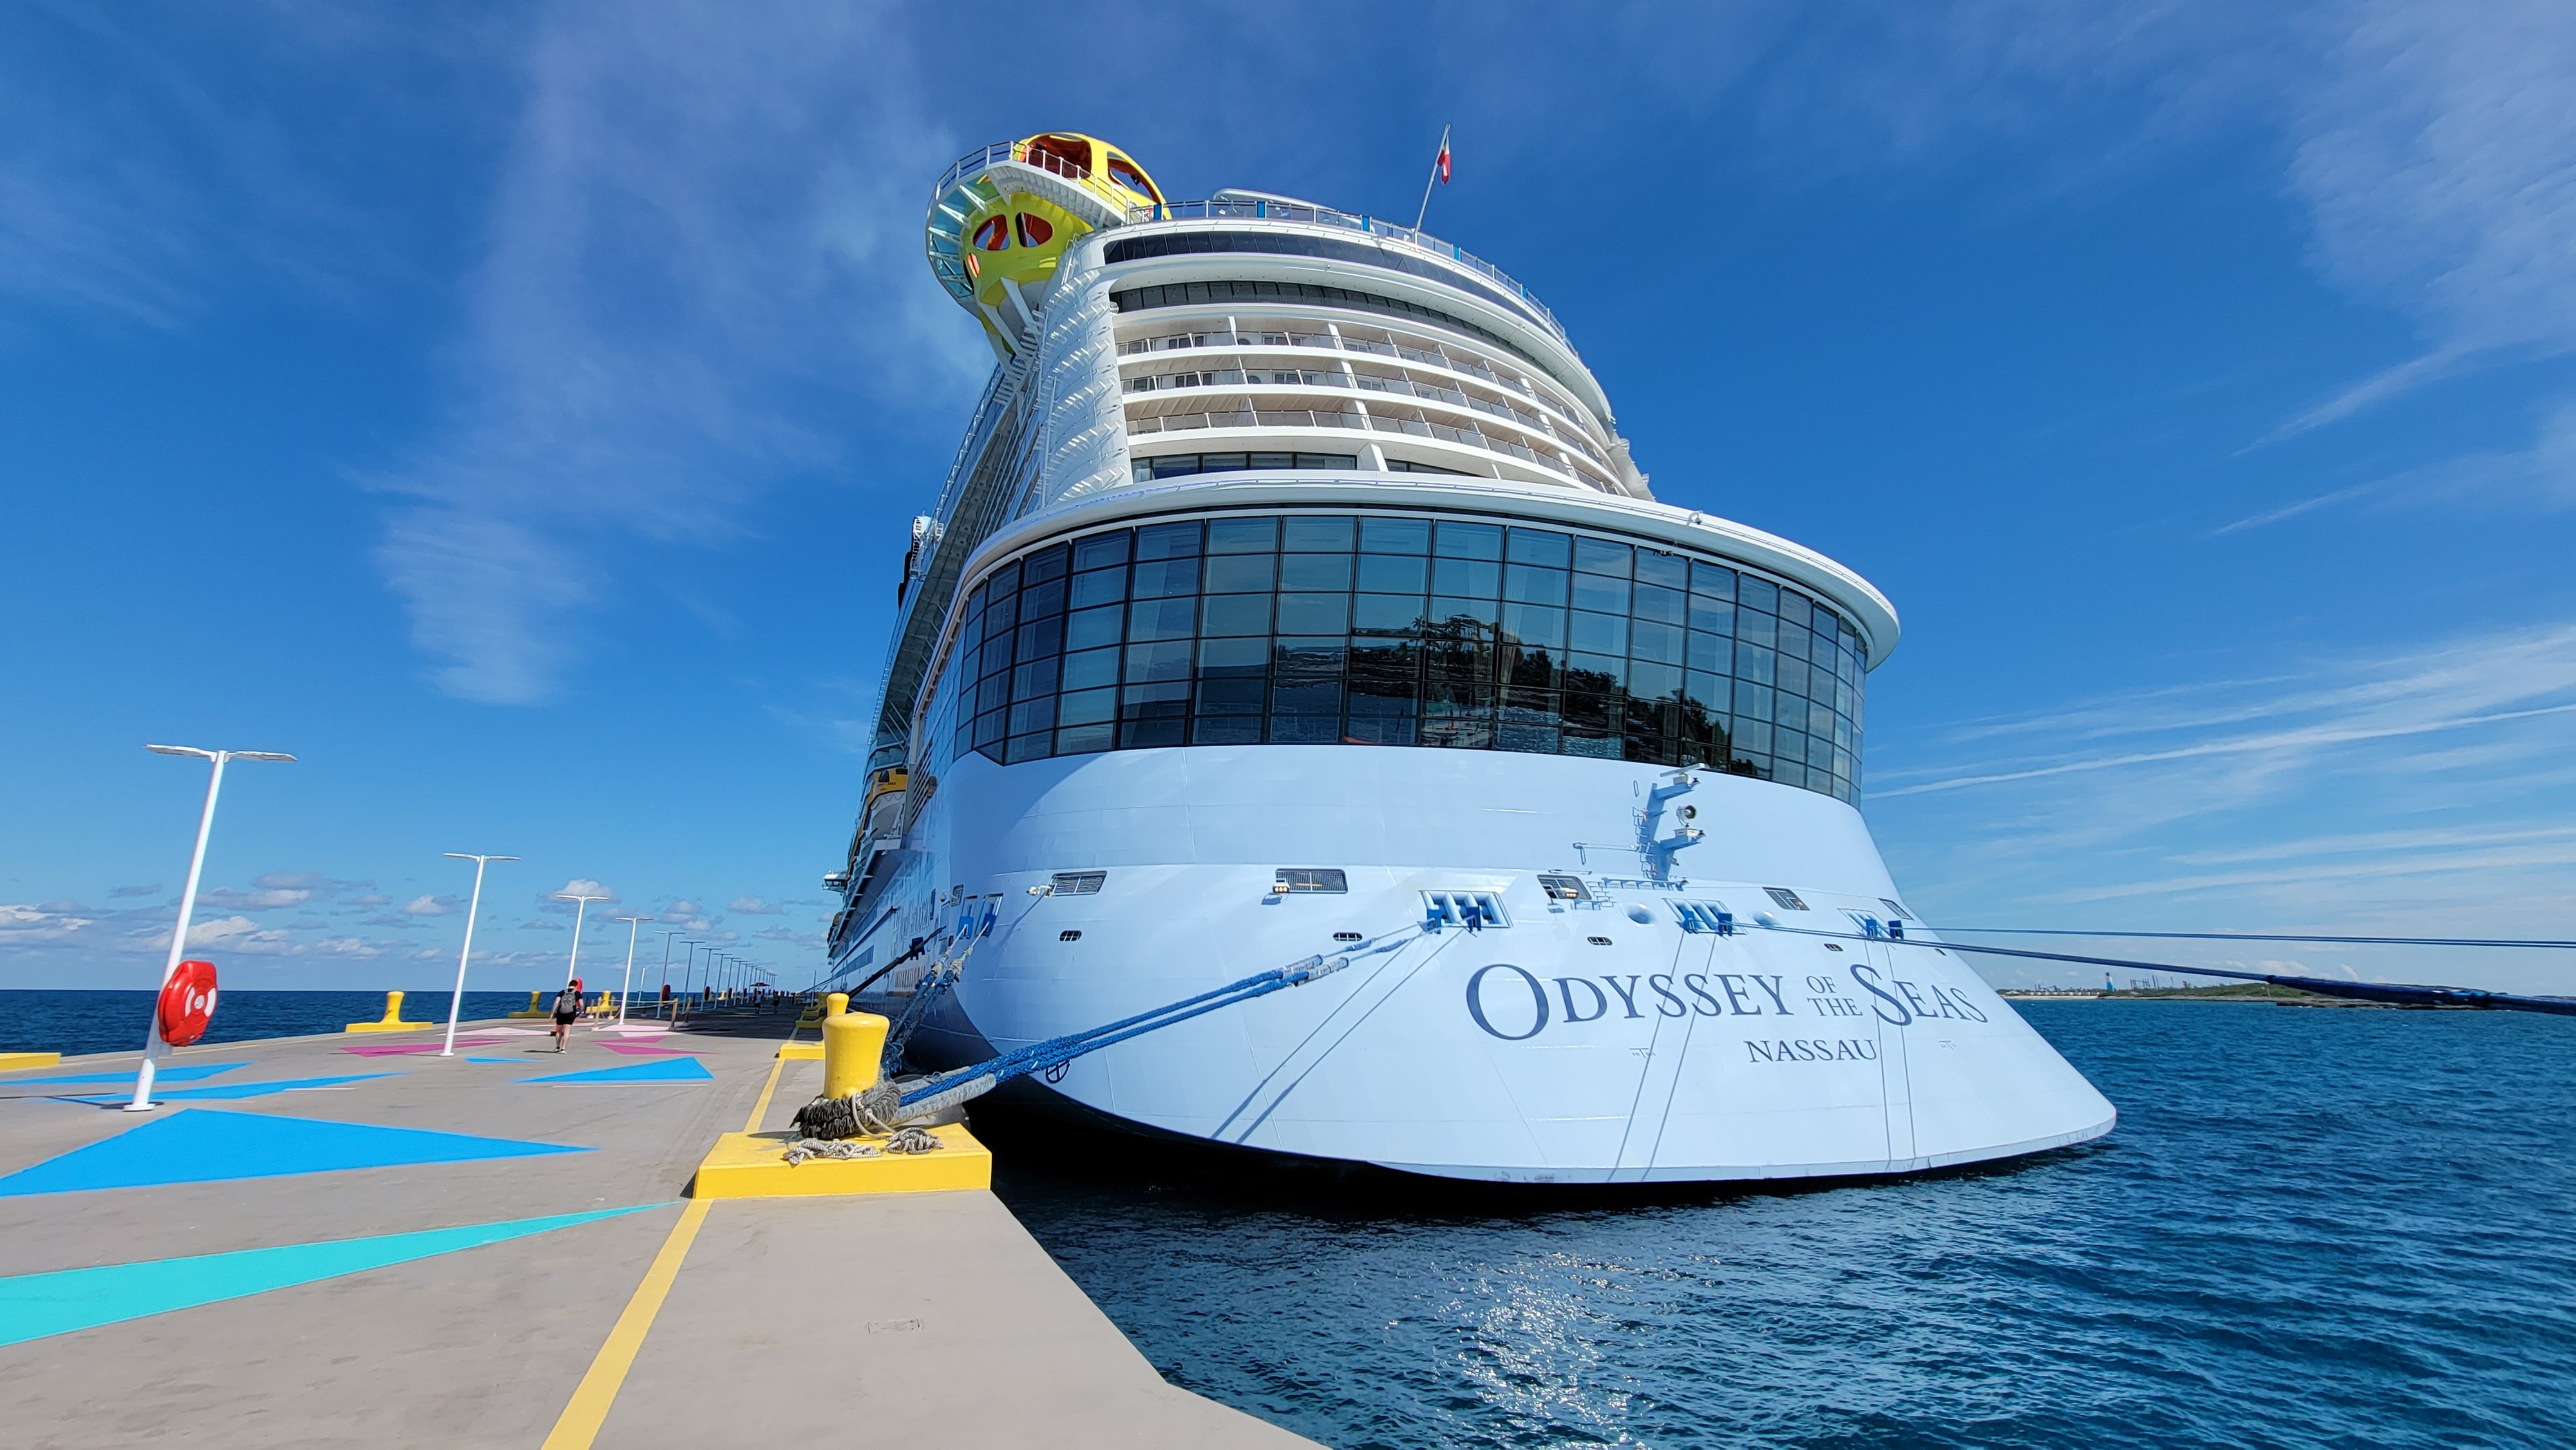 cruise deals with free gratuities